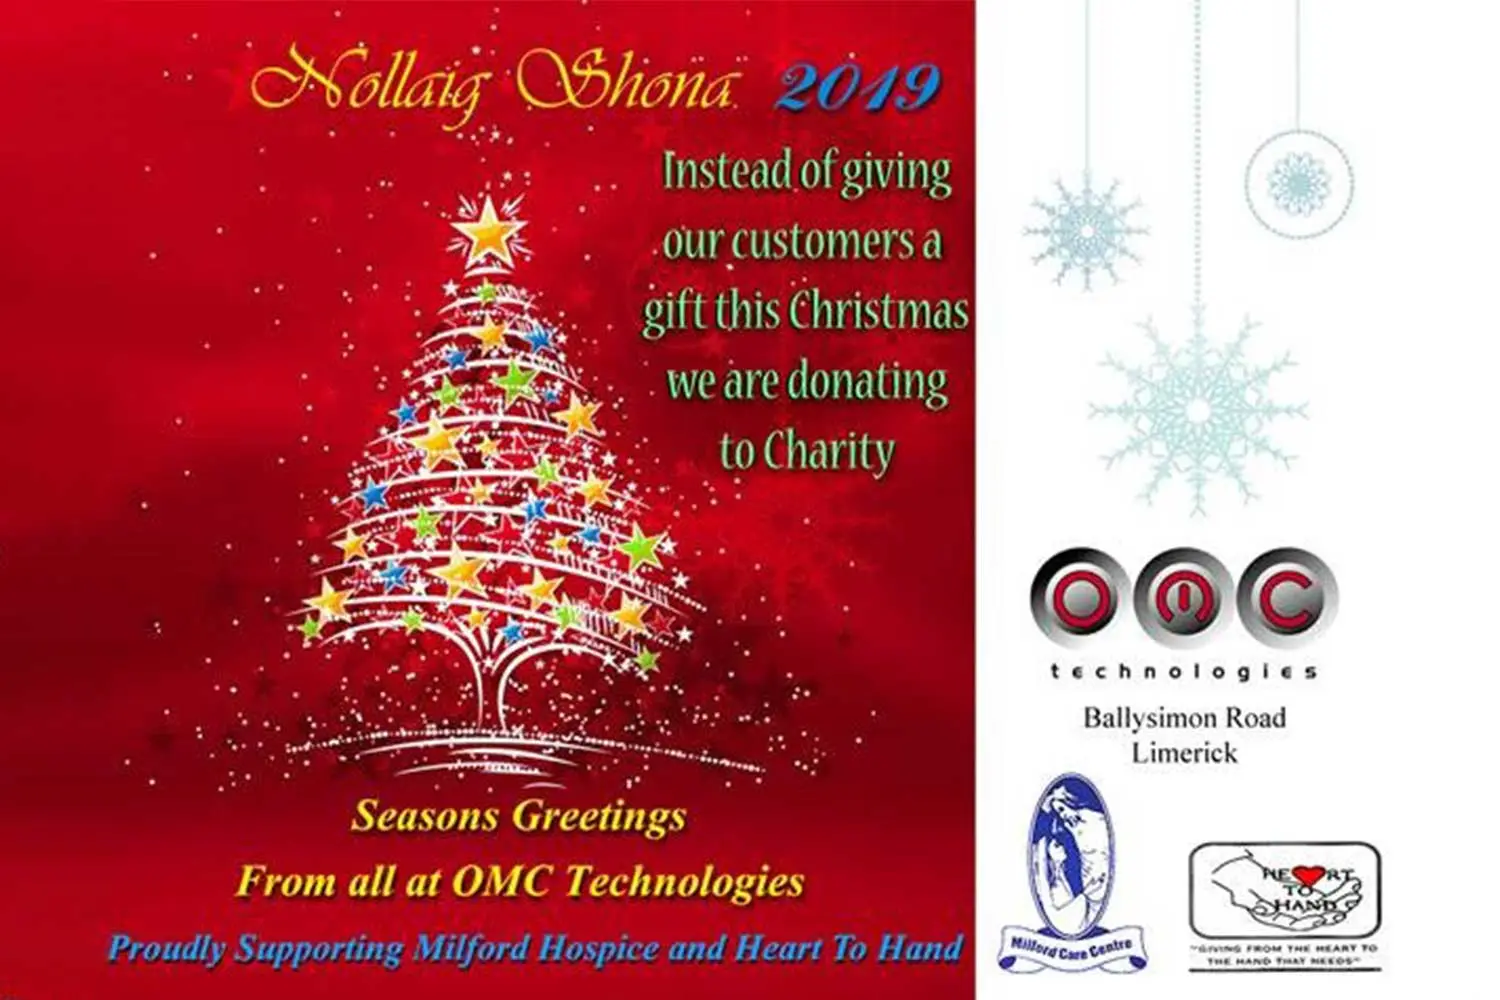 OMC Technologies - Supporting local charities at Christmas